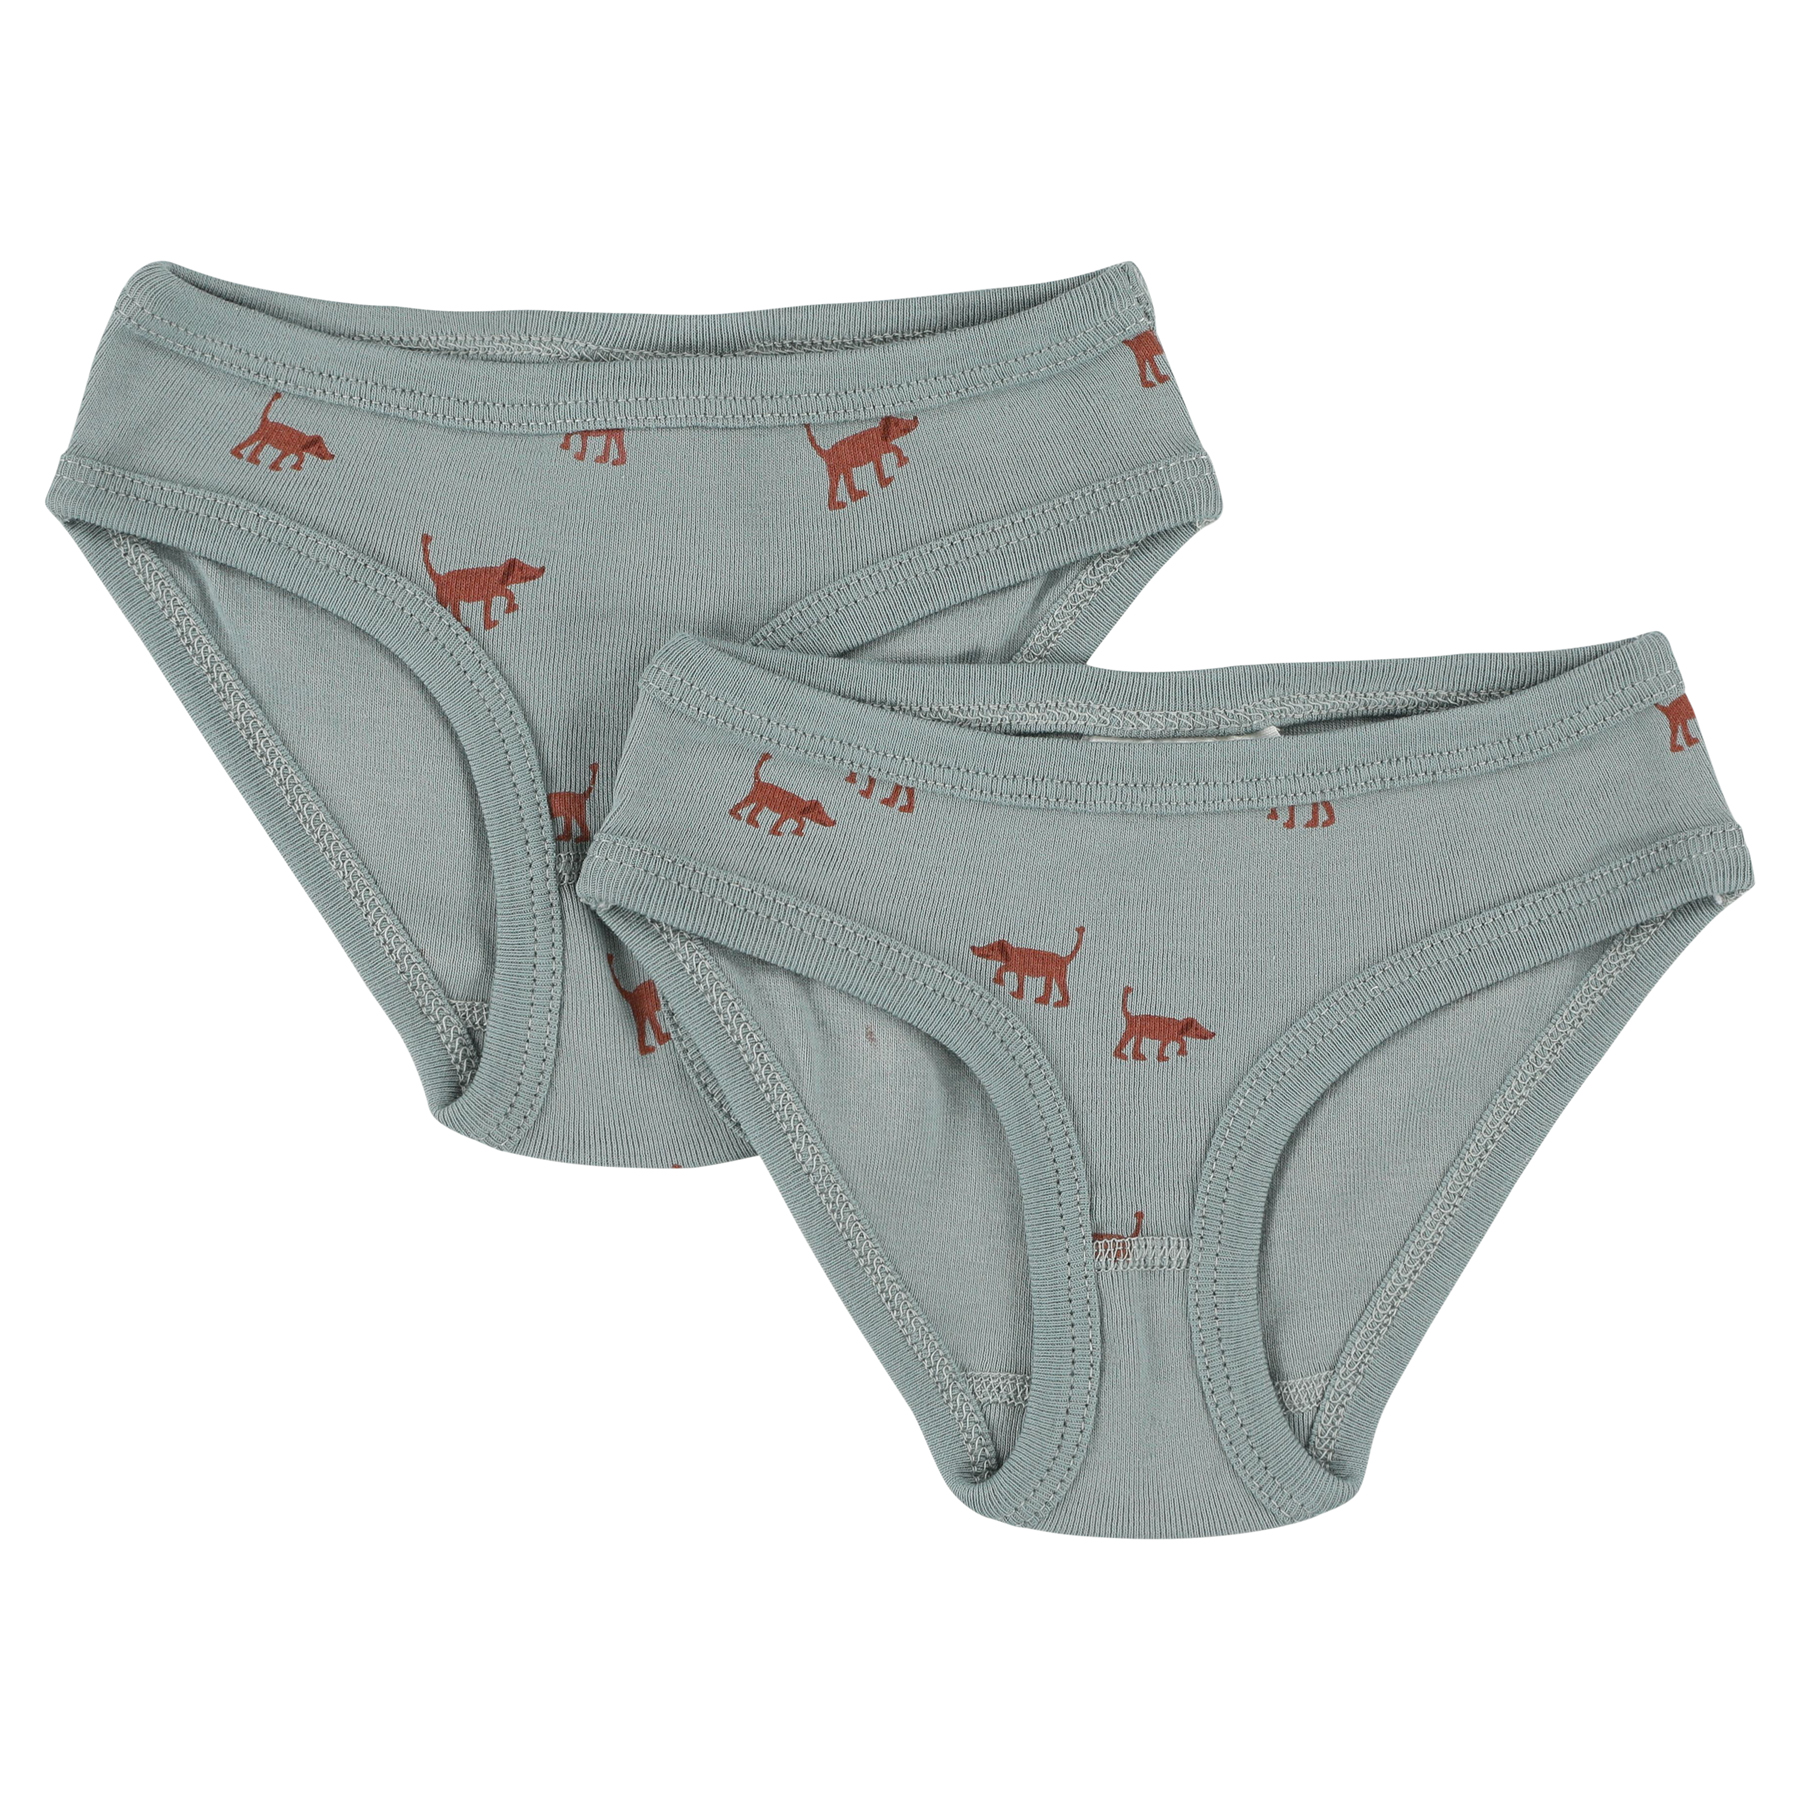 Slips 2-pack - Playful Pup